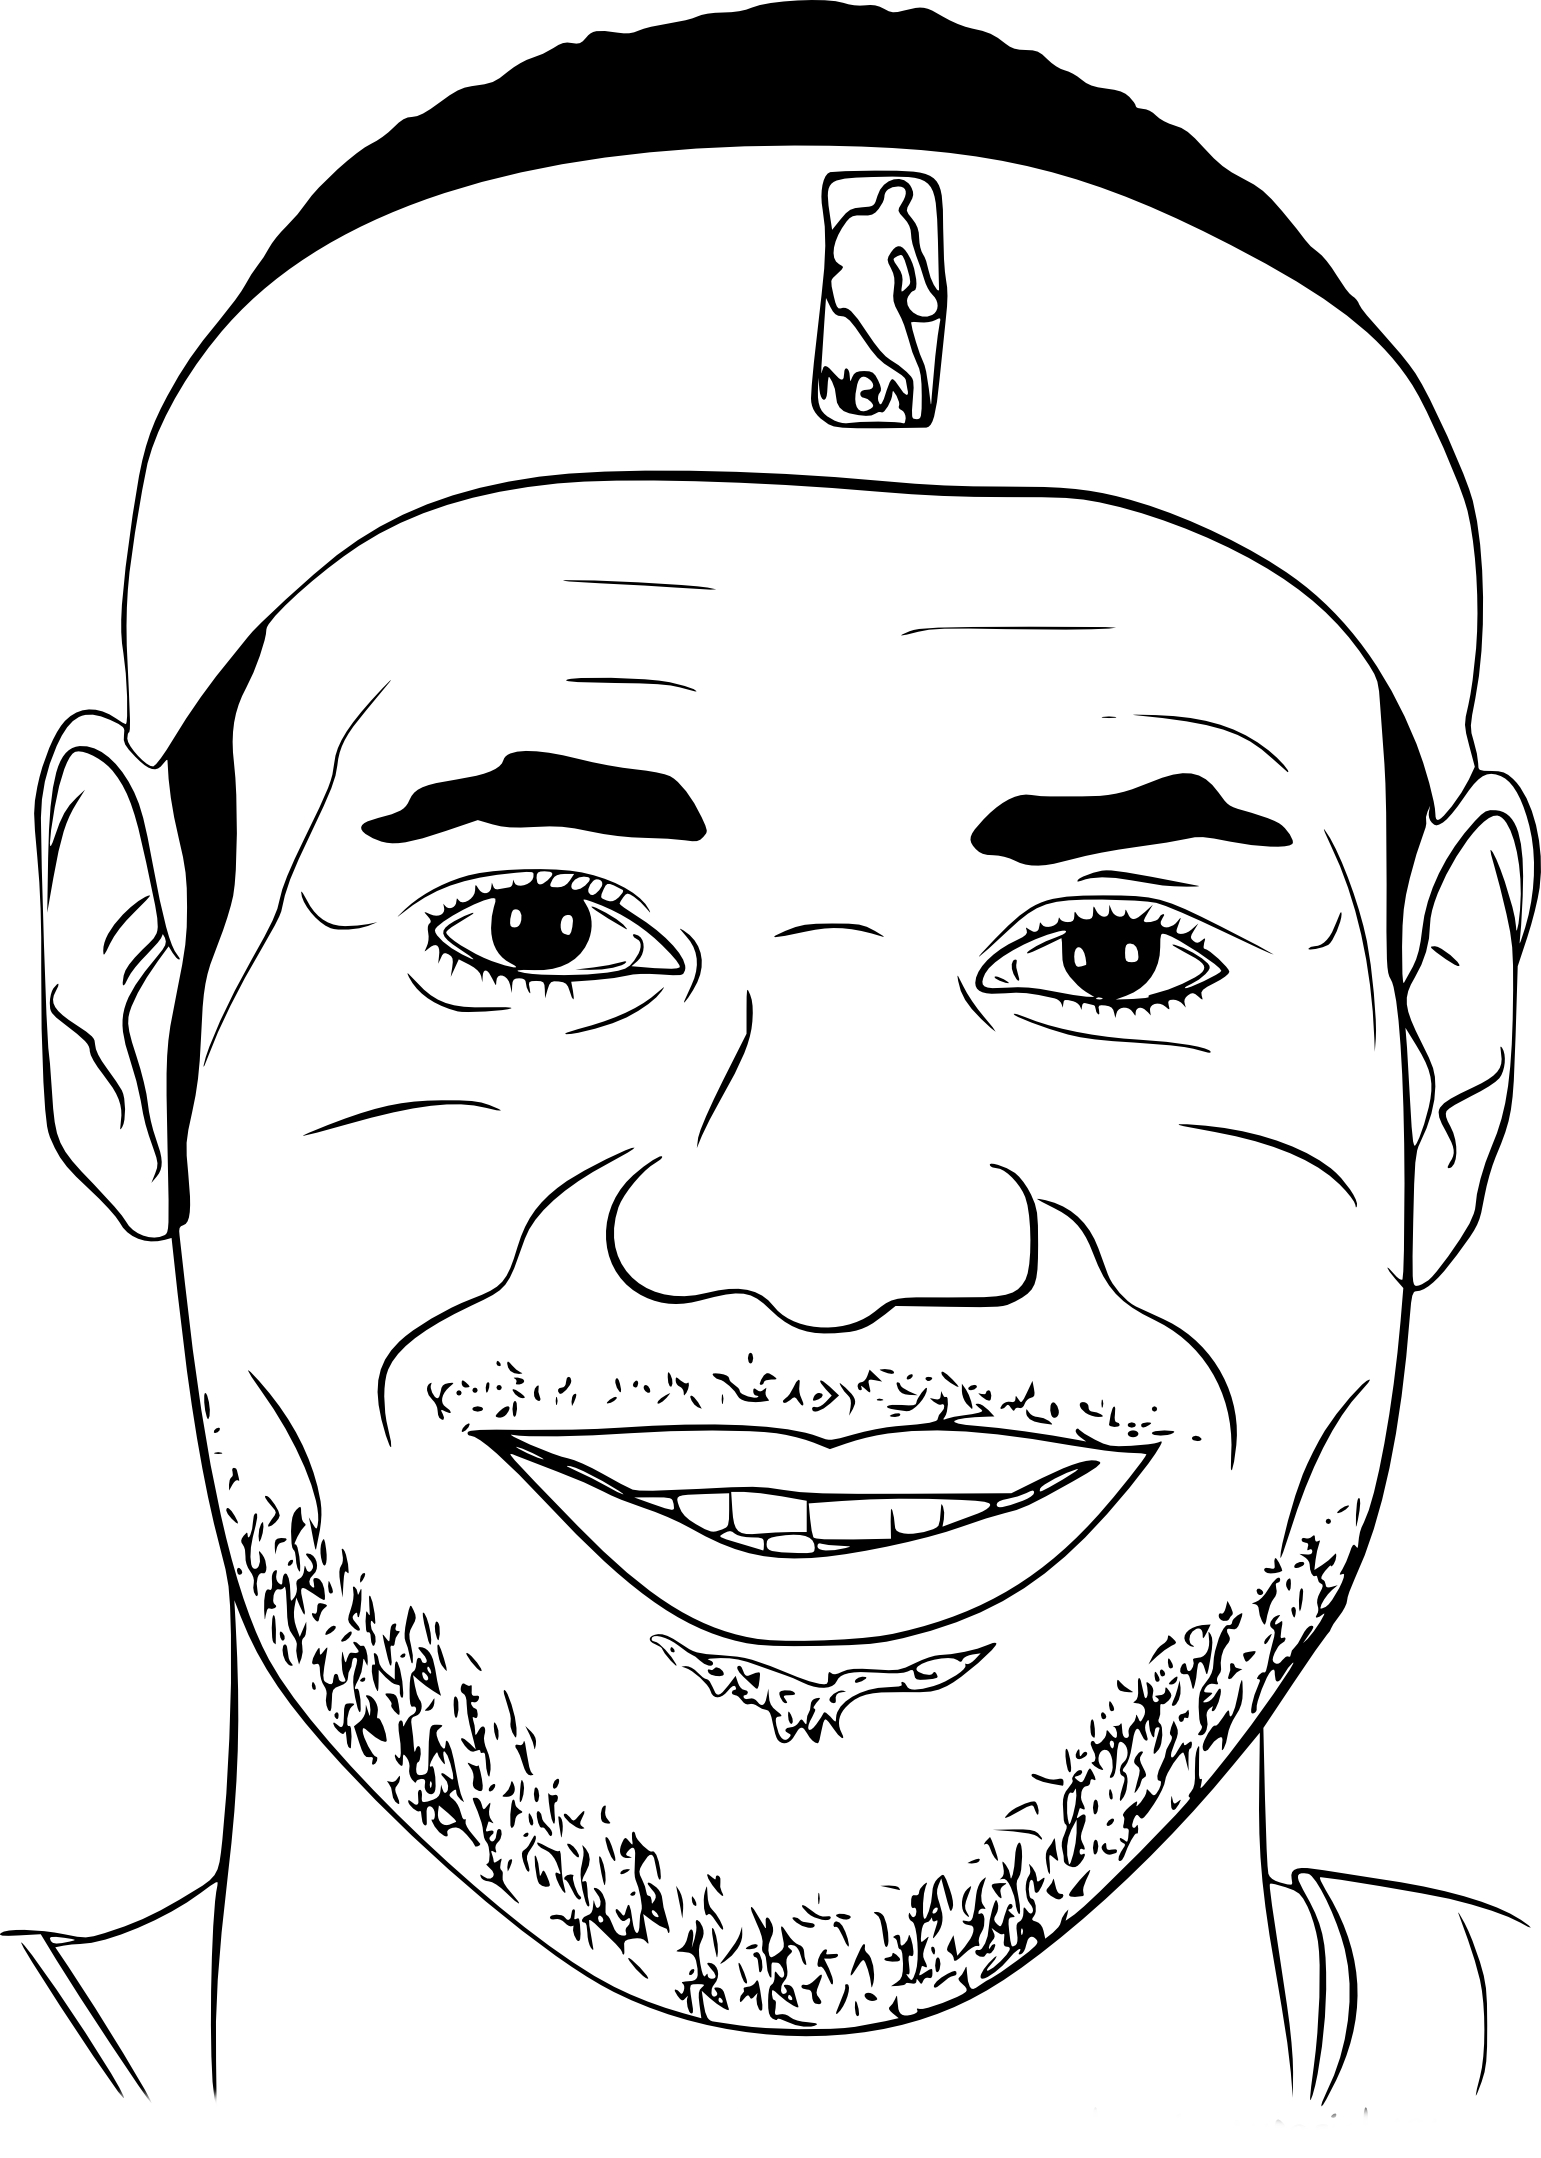 Lebron James coloring page